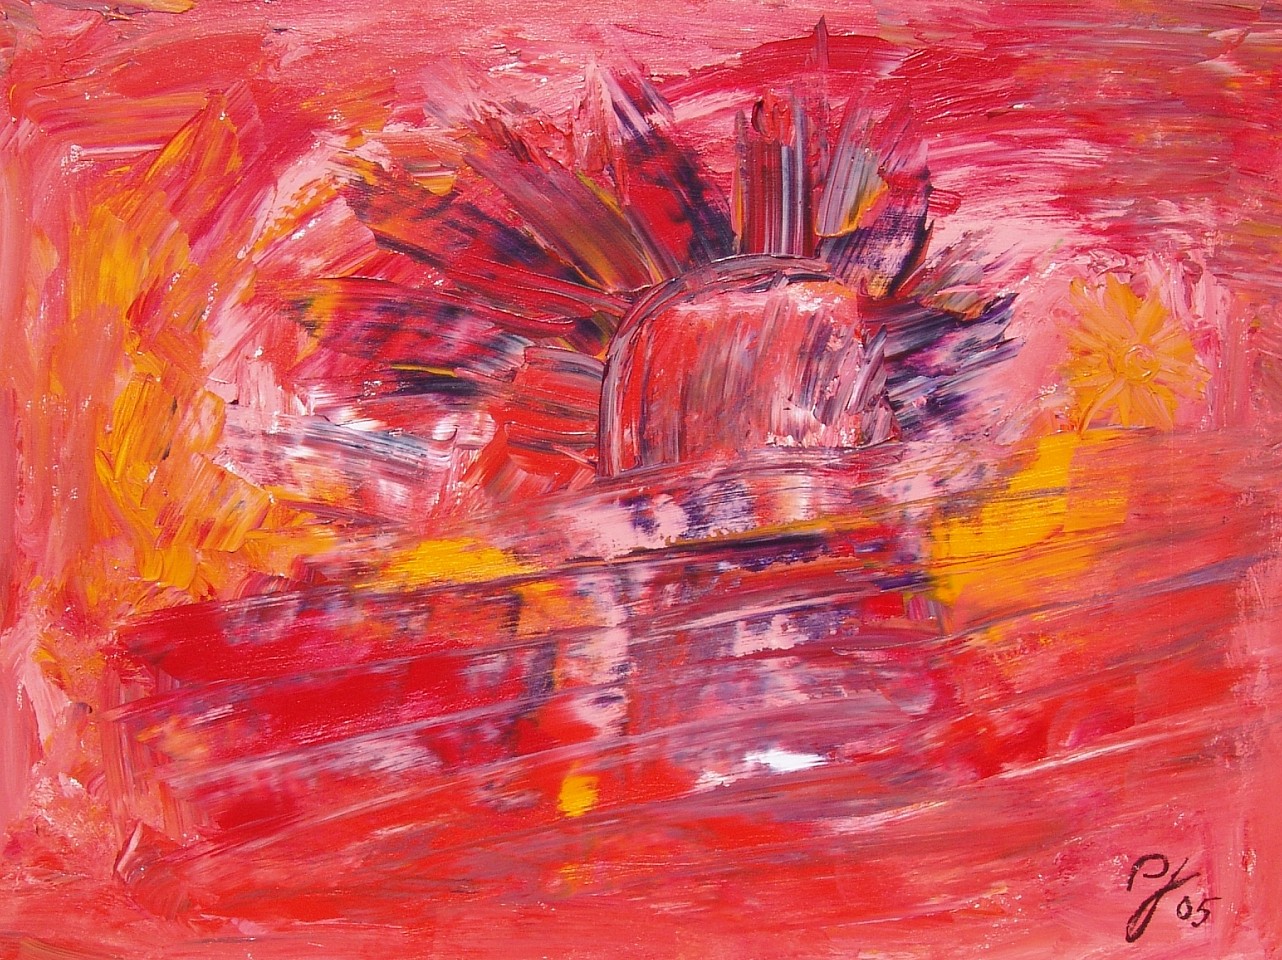 Diego Jacobson, Peace plan, 2005
Acrylic on Canvas, 40 x 30 in. (101.6 x 76.2 cm)
0737